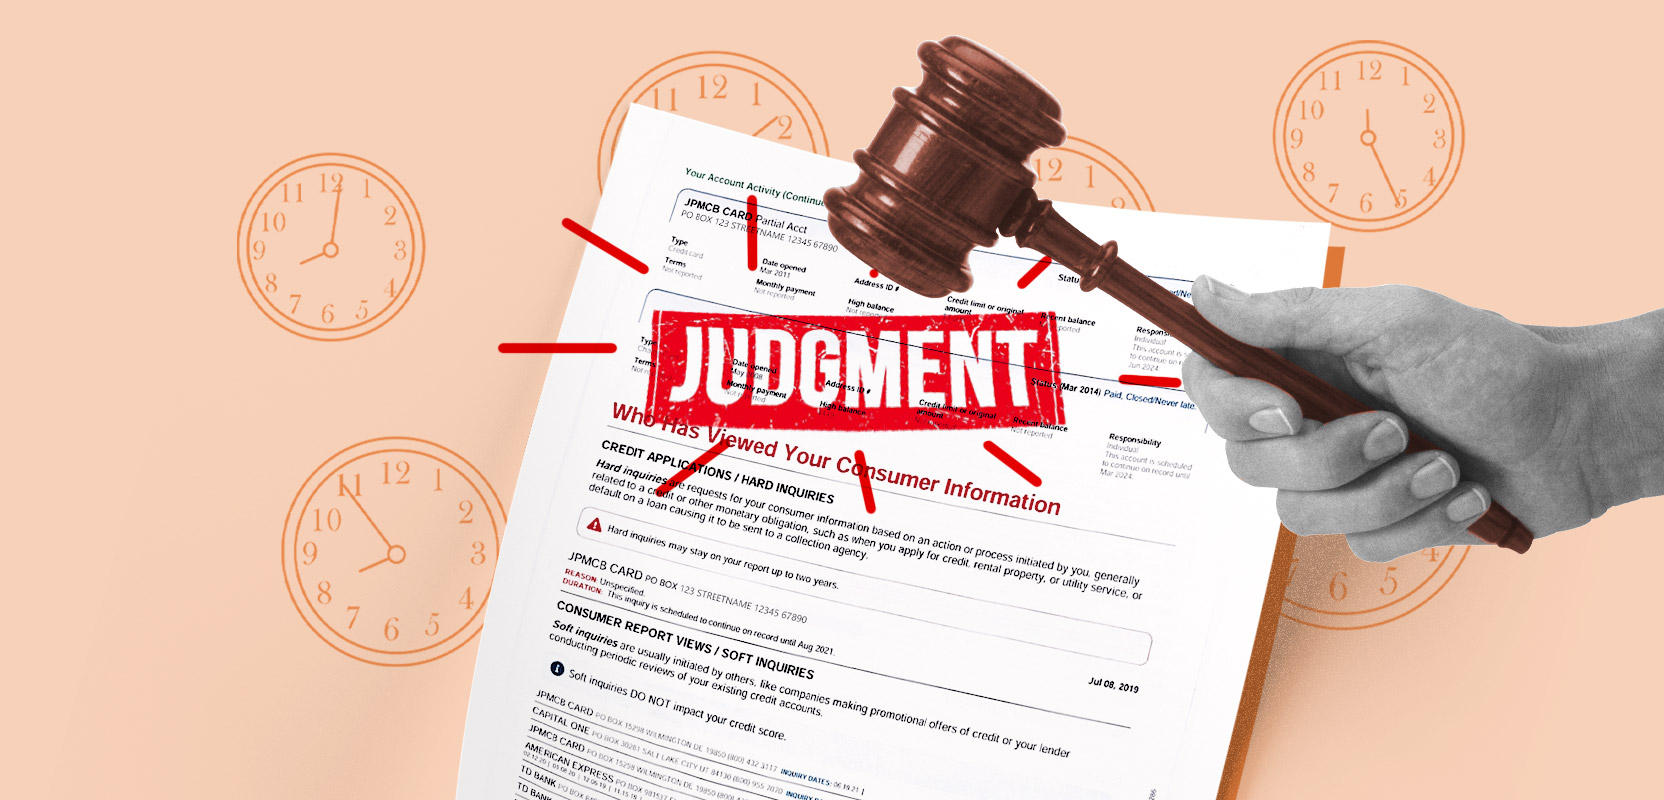 How Long Does A Judgement Stay On A Credit Report